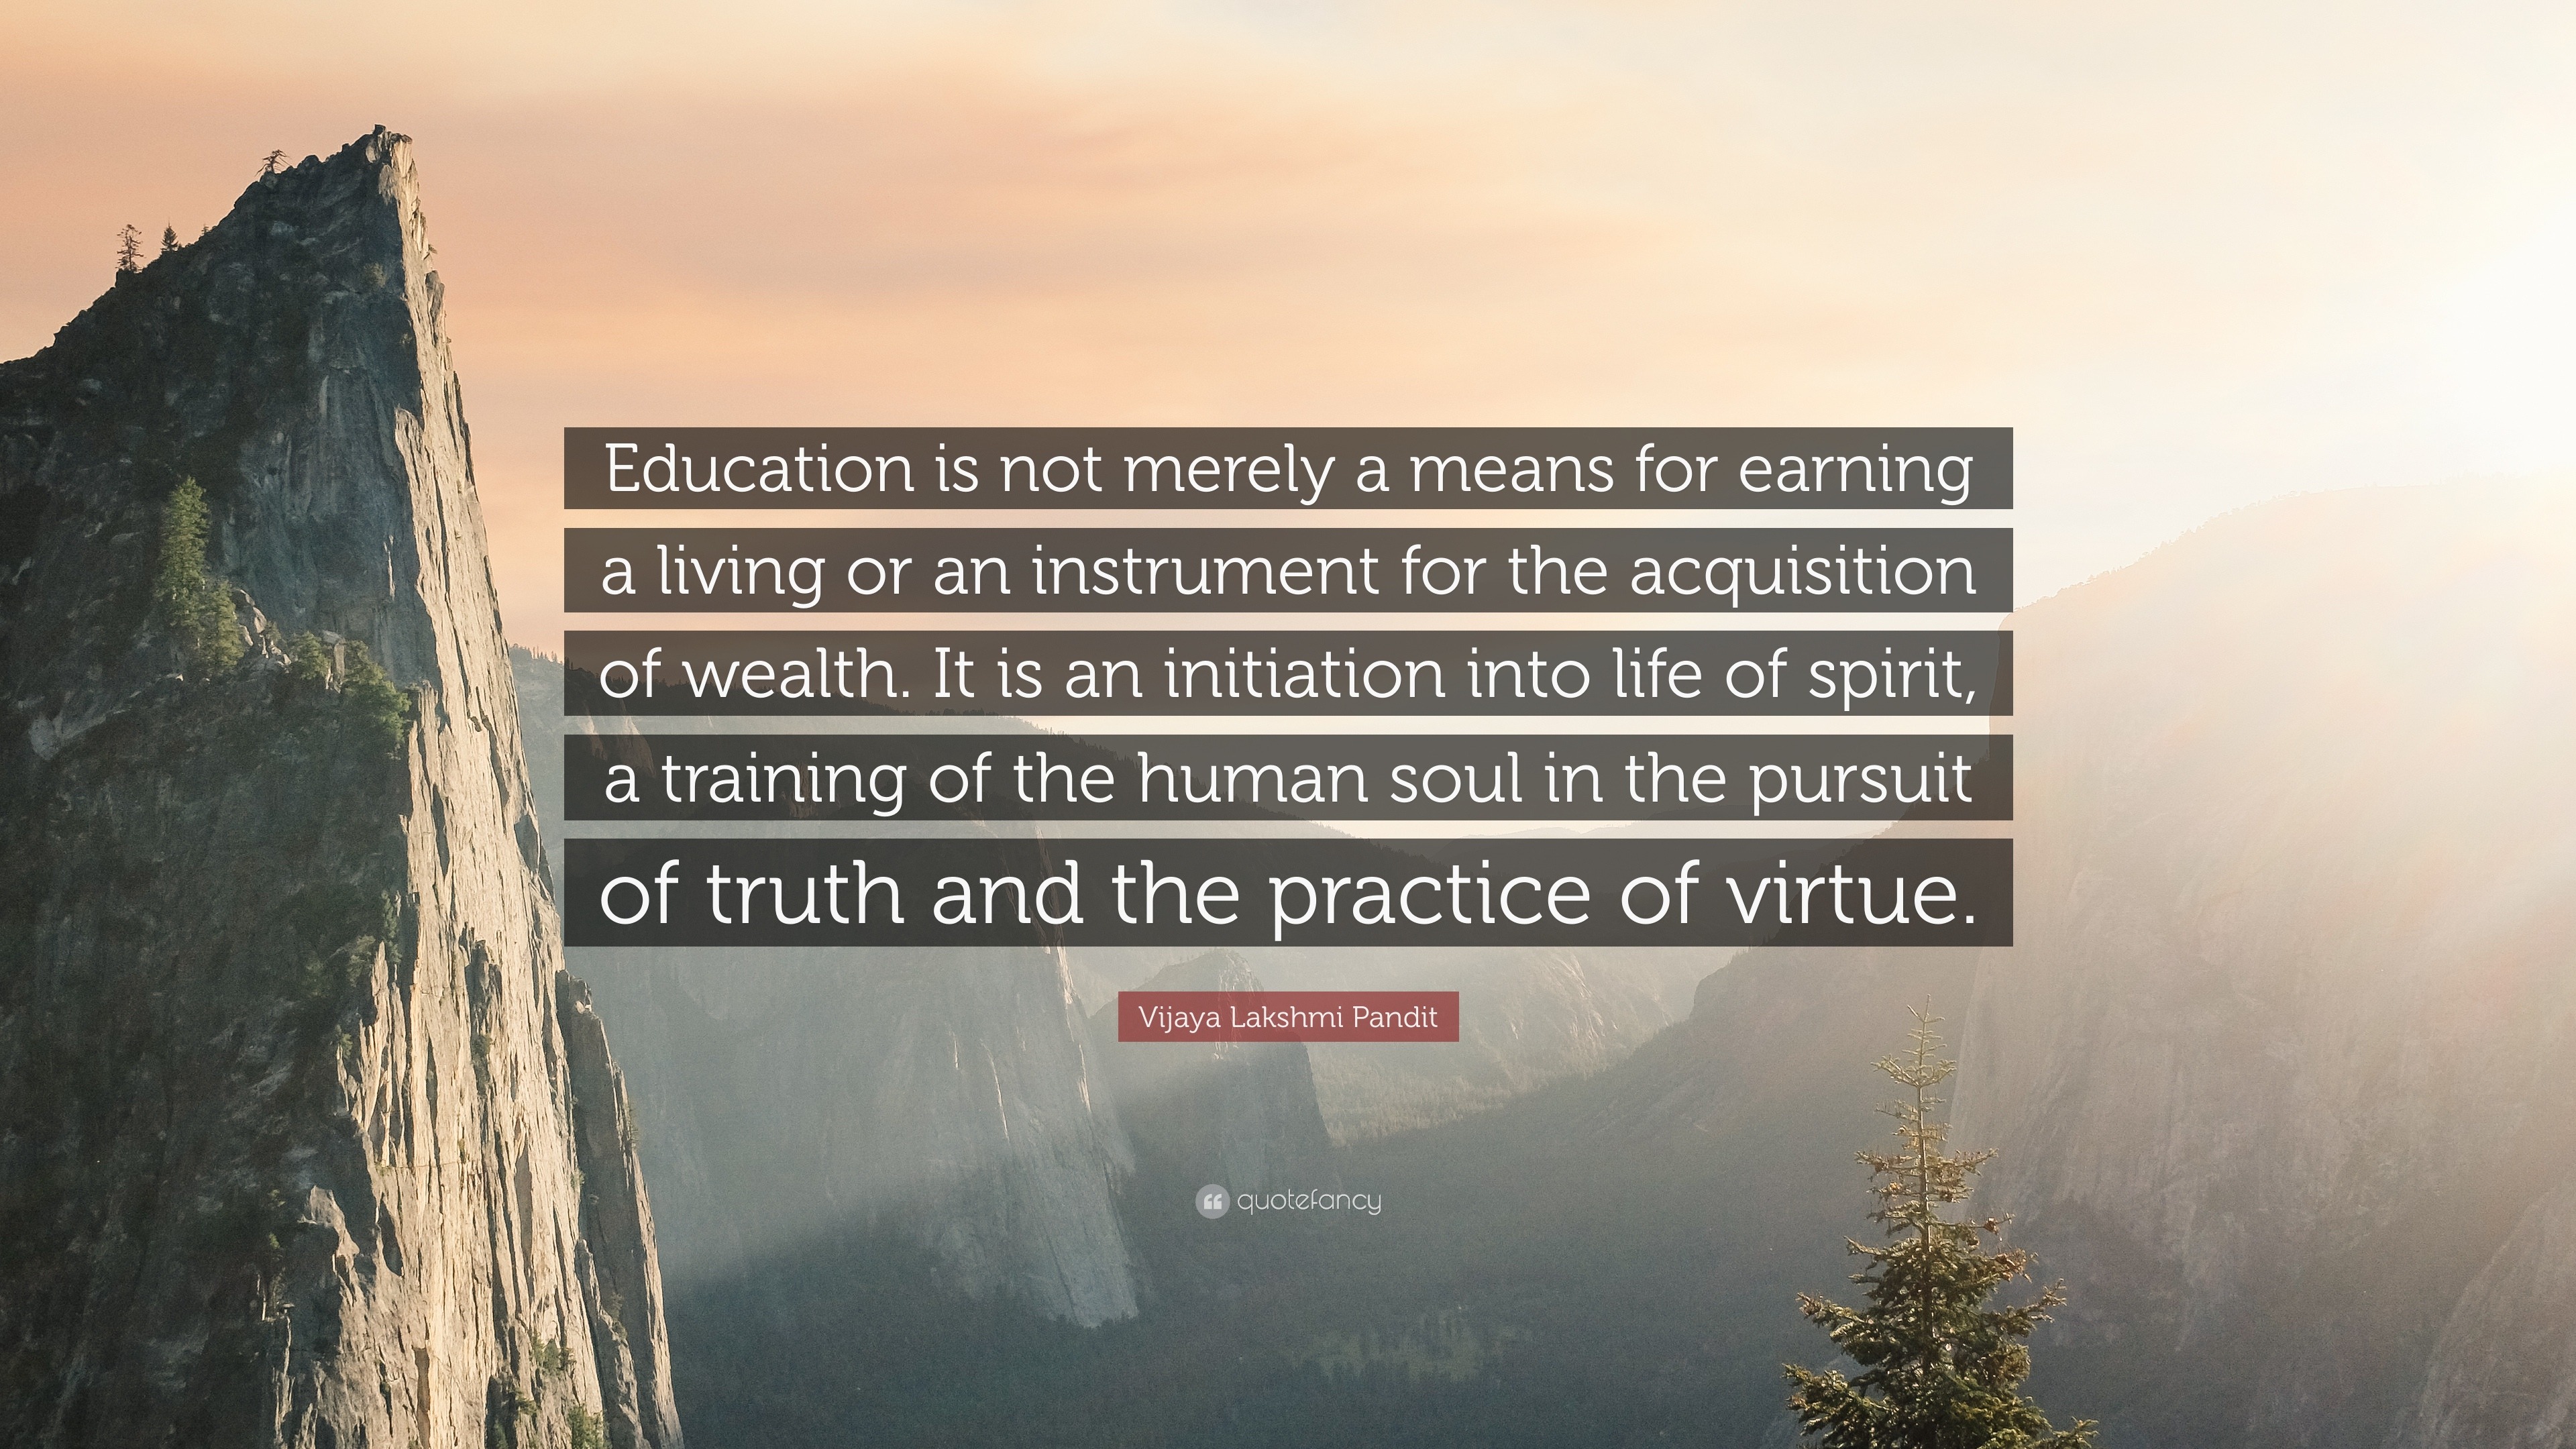 Vijaya Lakshmi Pandit: Education is not merely a means for earning a living  or an instrument for the acquisition of wealth. It is an initiation into  life of spirit, a training of